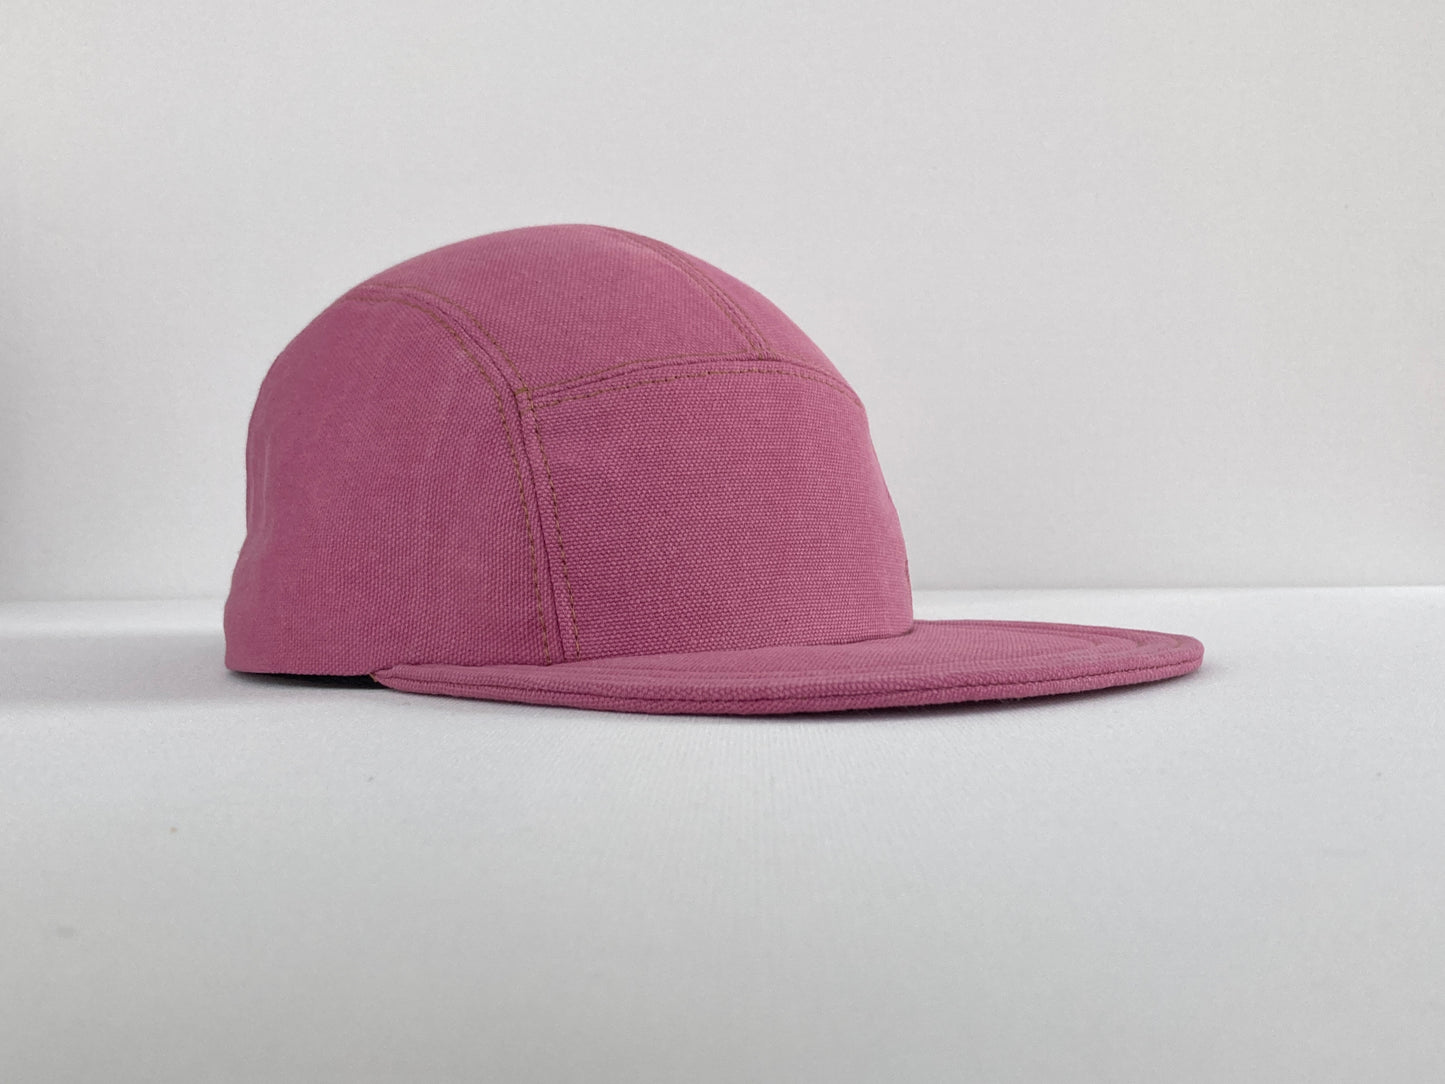 Naturally Dyed Camp Hat - Raspberry